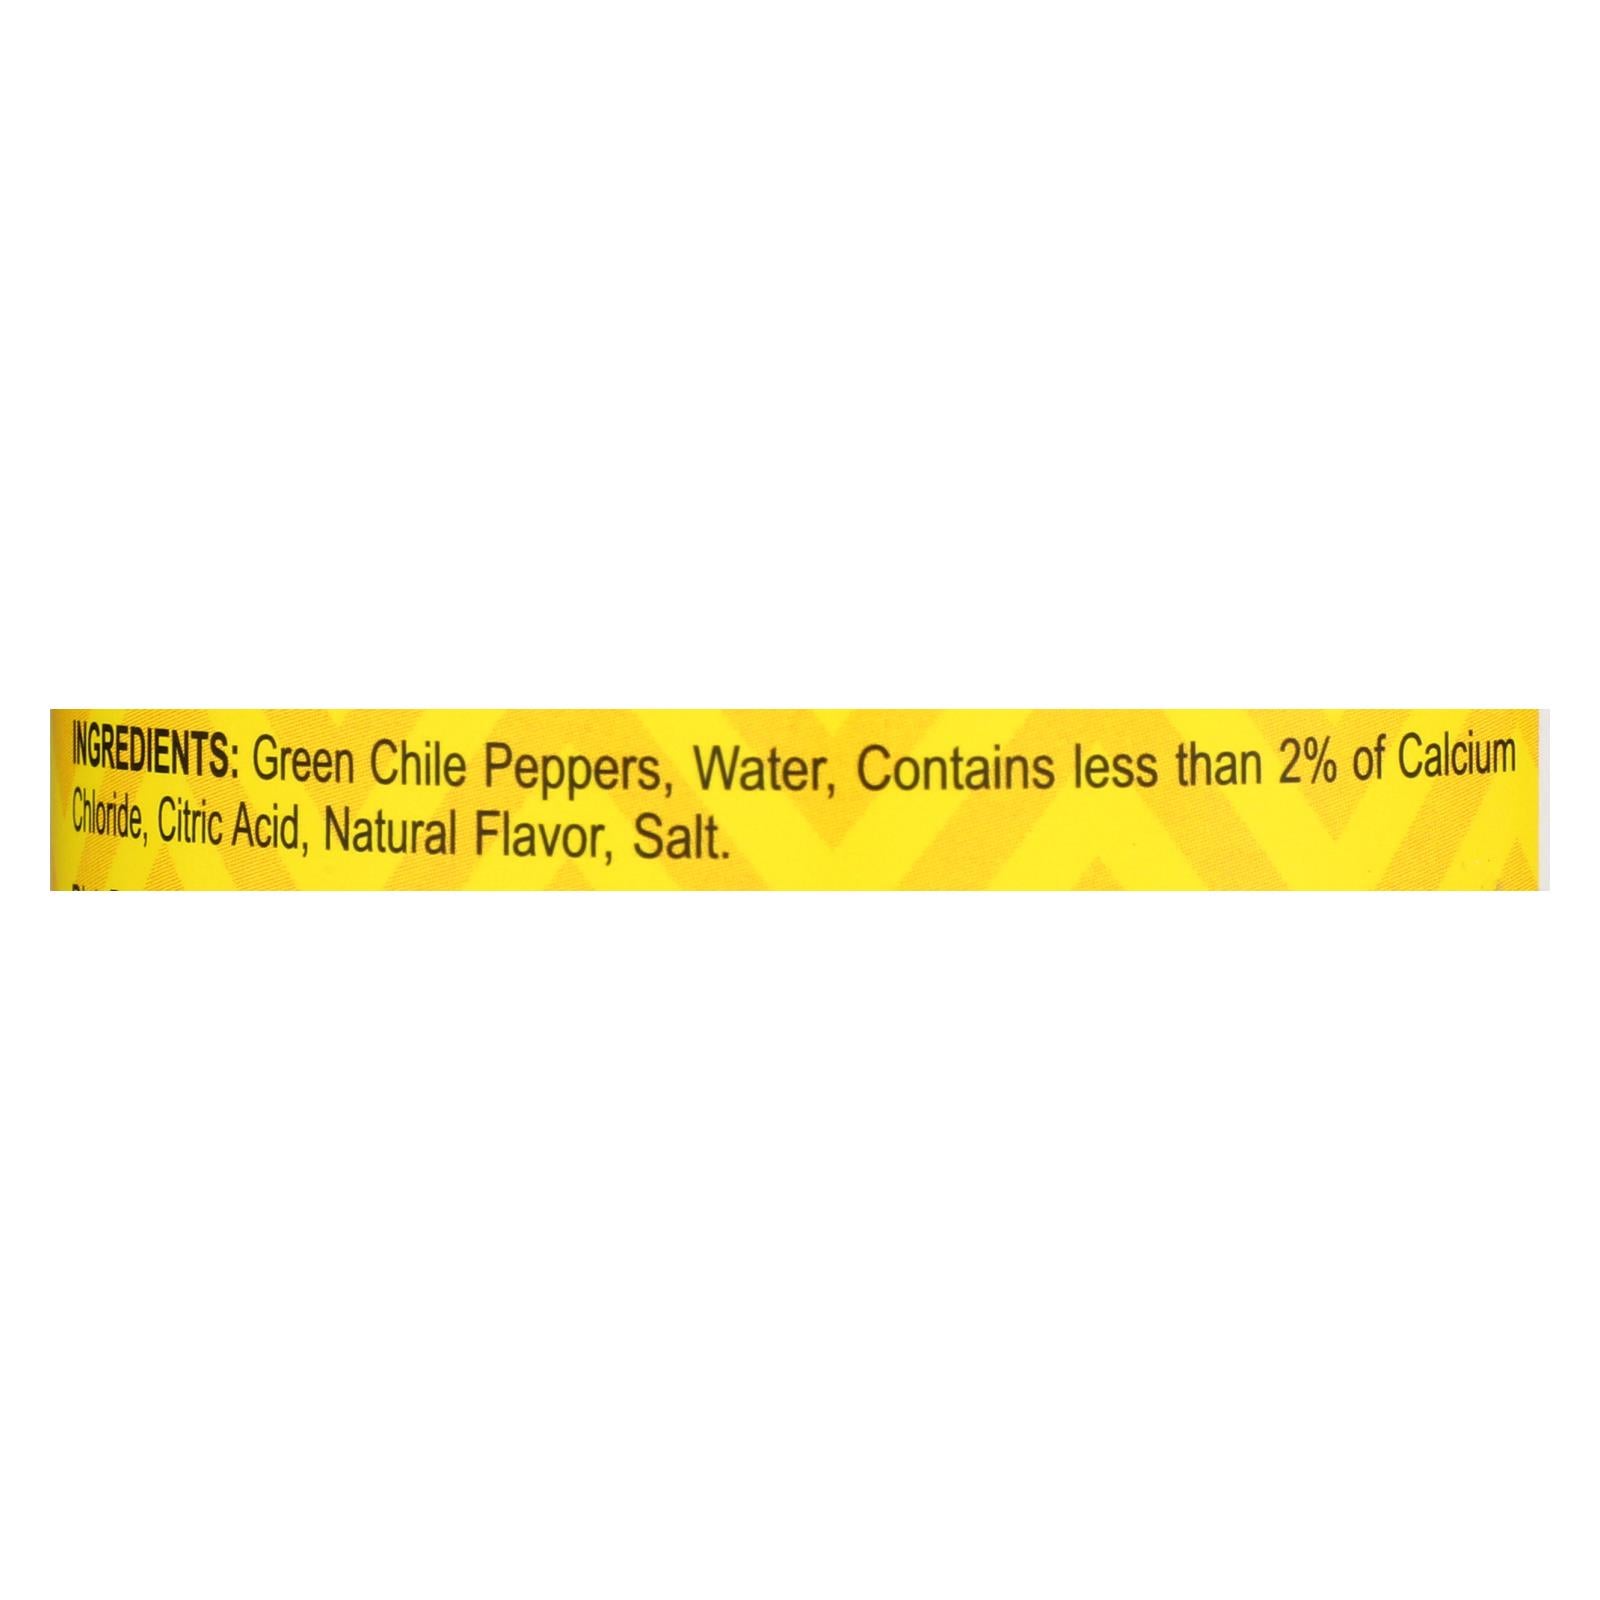 Hatch Chili Hatch Diced Hot Green Chilies - Diced Green Chiles - Case Of 24 - 4 Oz.